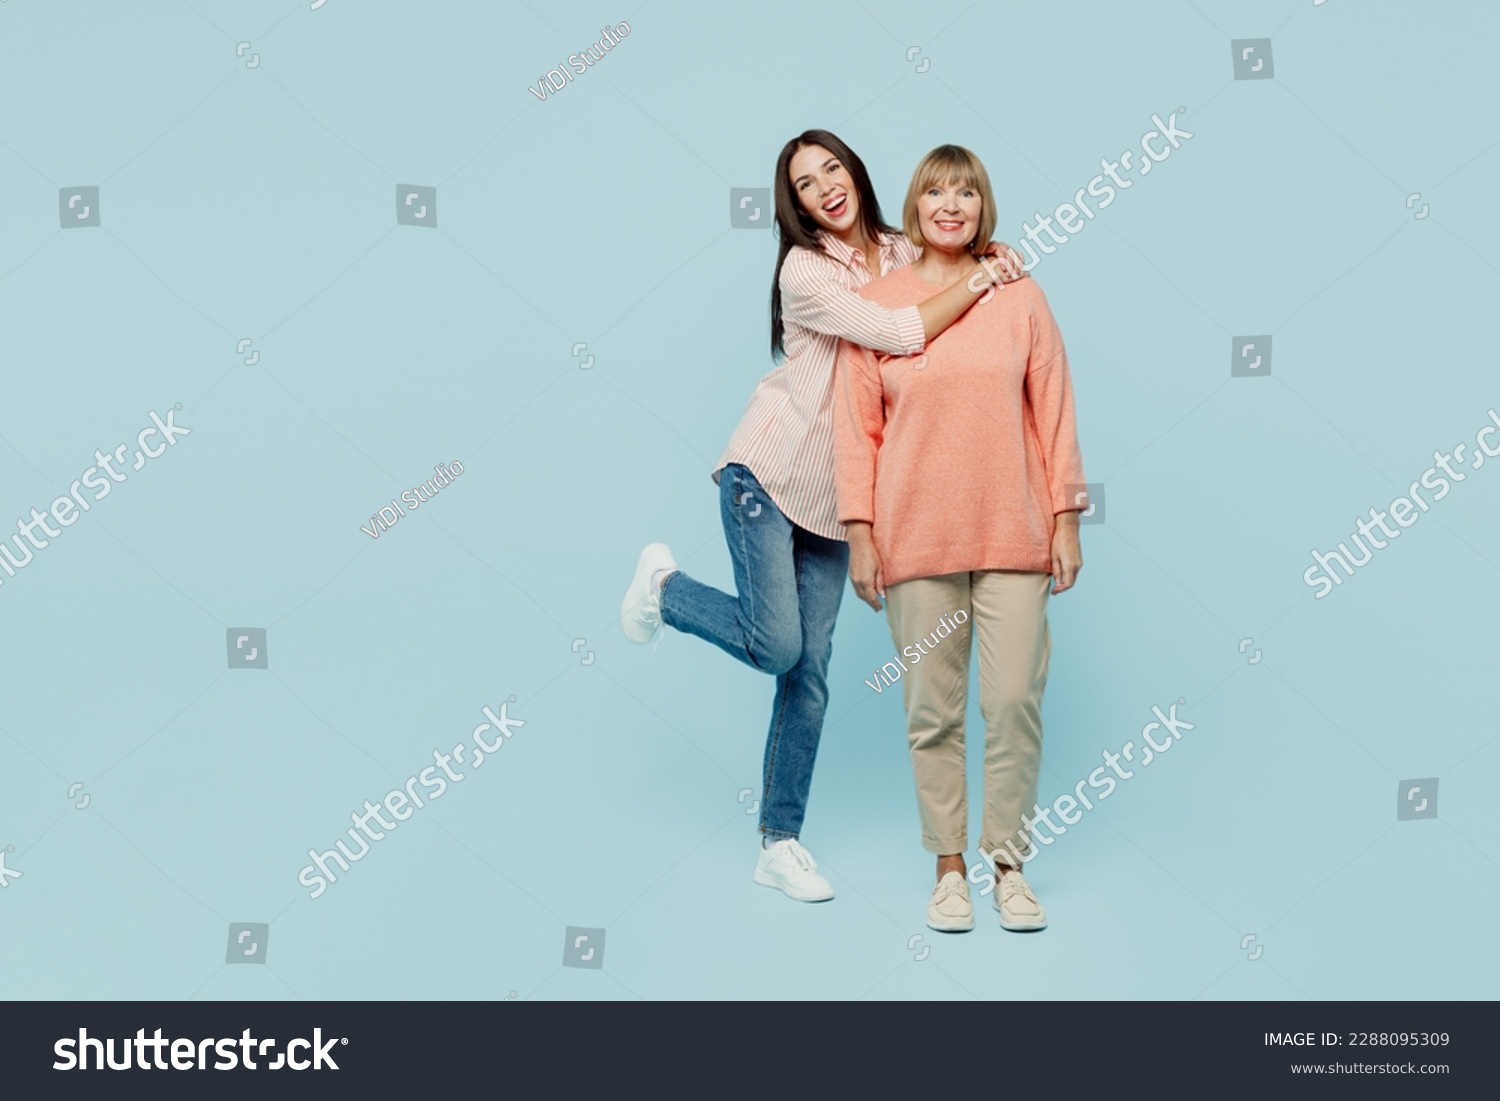 Full body smiling happy fun cheerful cool elder parent mom with young adult daughter two women together wear casual clothes look camera hugging isolated on plain blue background. Family day concept #2288095309